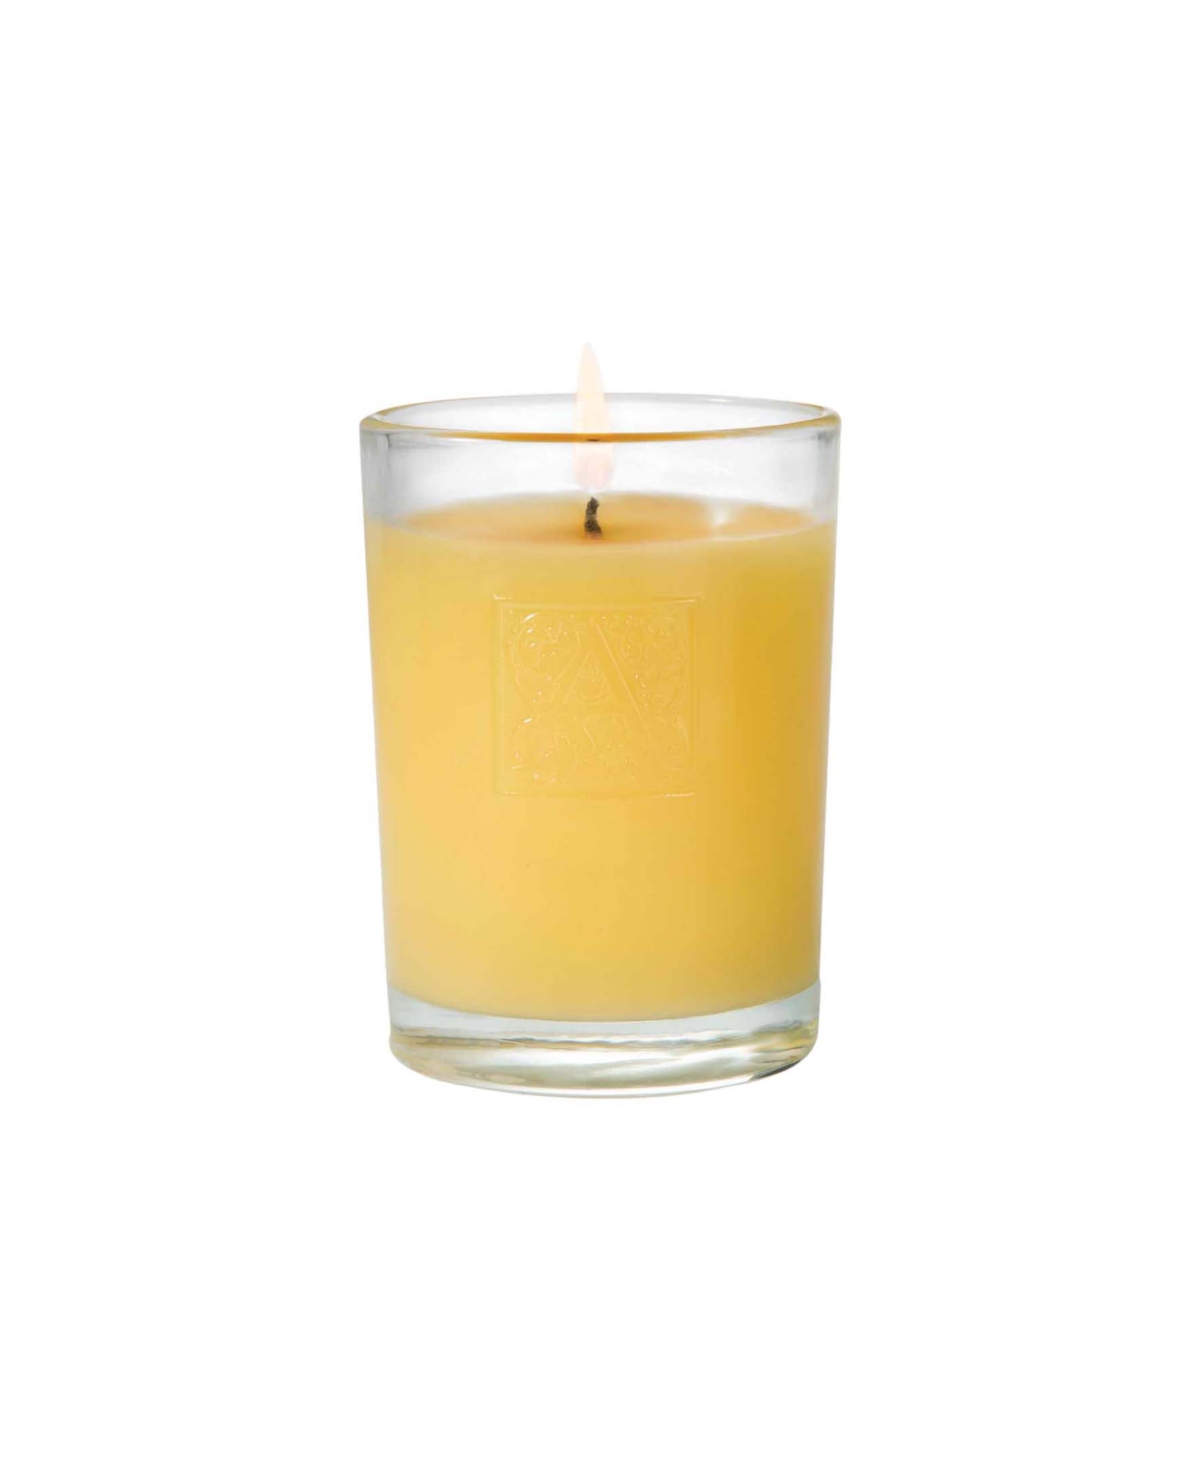 Aromatique Agave Pineapple Votive Candle